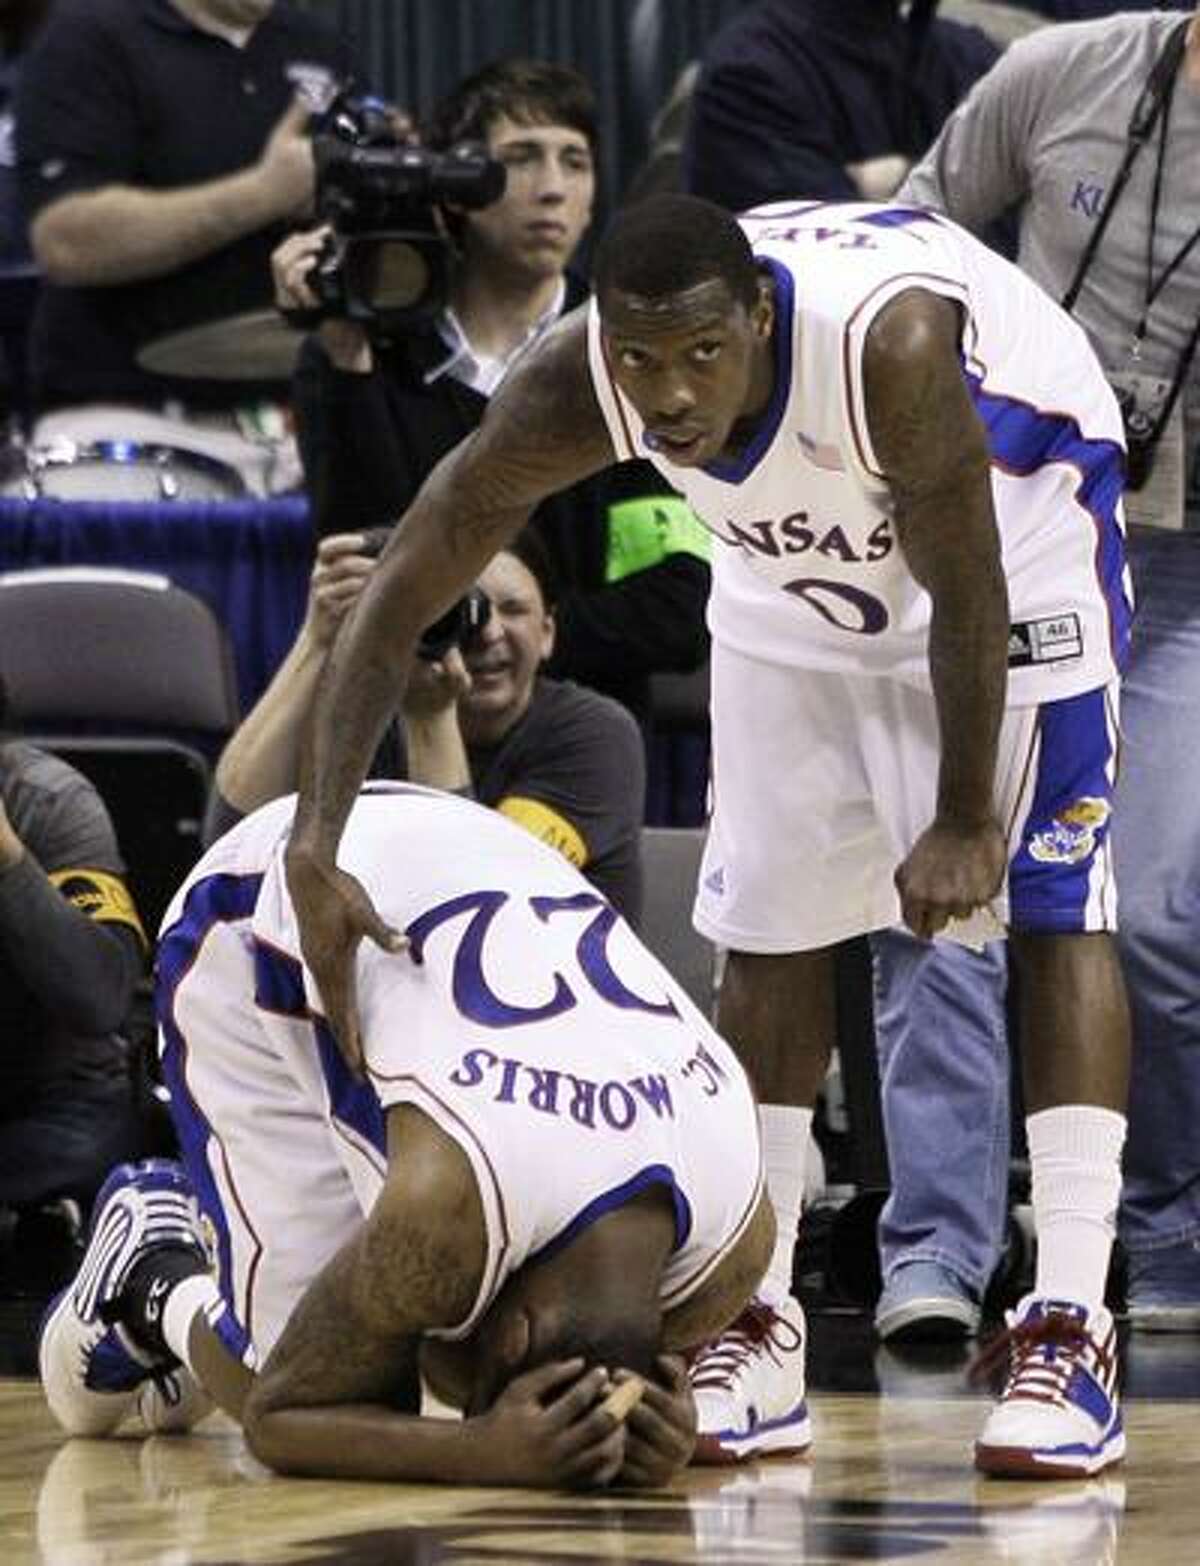 Kansas guard Tyshawn Taylor, right, consoles Kansas forward Marcus Morris (22) after their 69-67 loss to Northern Iowa in an NCAA second-round college basketball game, Saturday. (Associated Press)